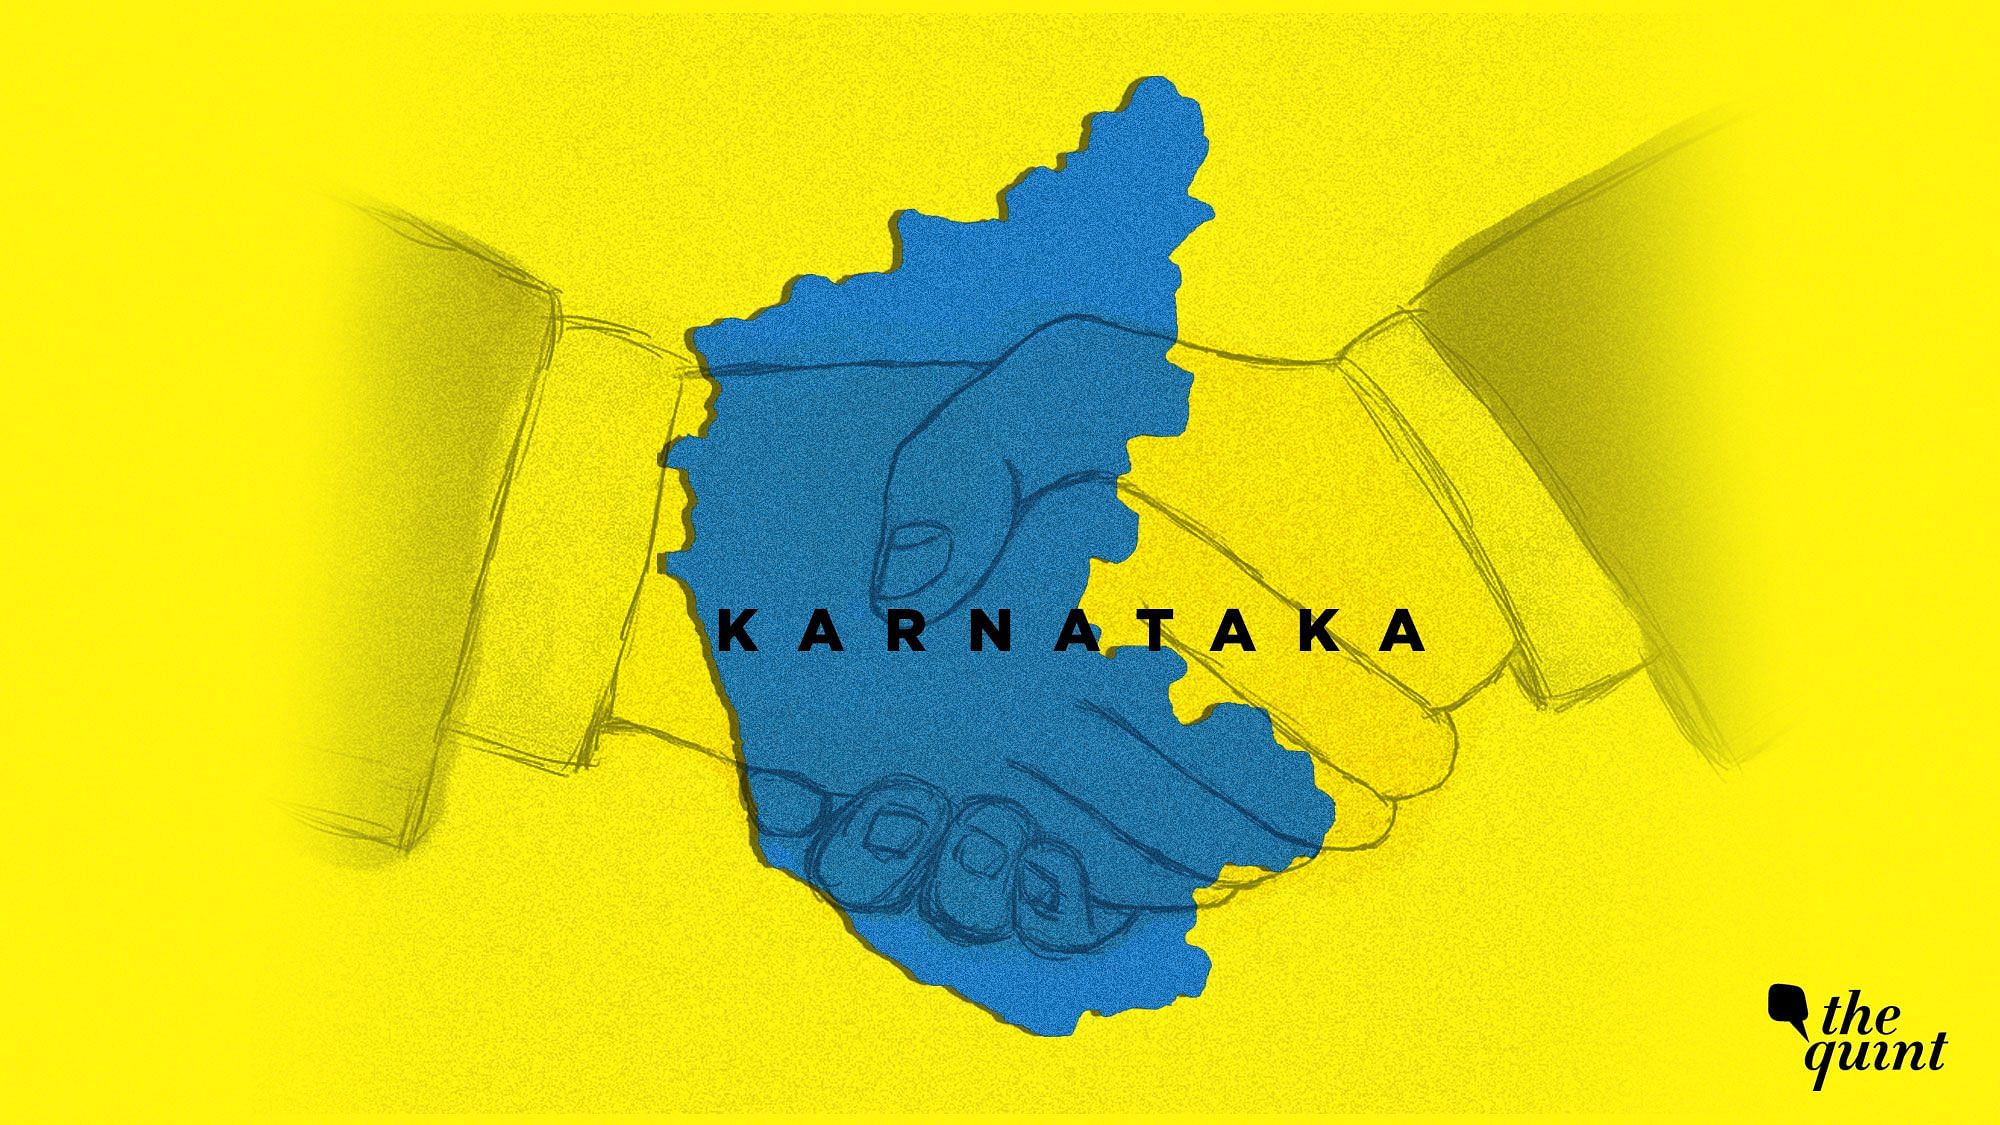 From Ramakrishna Hegde in 1983 to Kumaraswamy in 2006, no coalition government in Karnataka has completed its full term. 